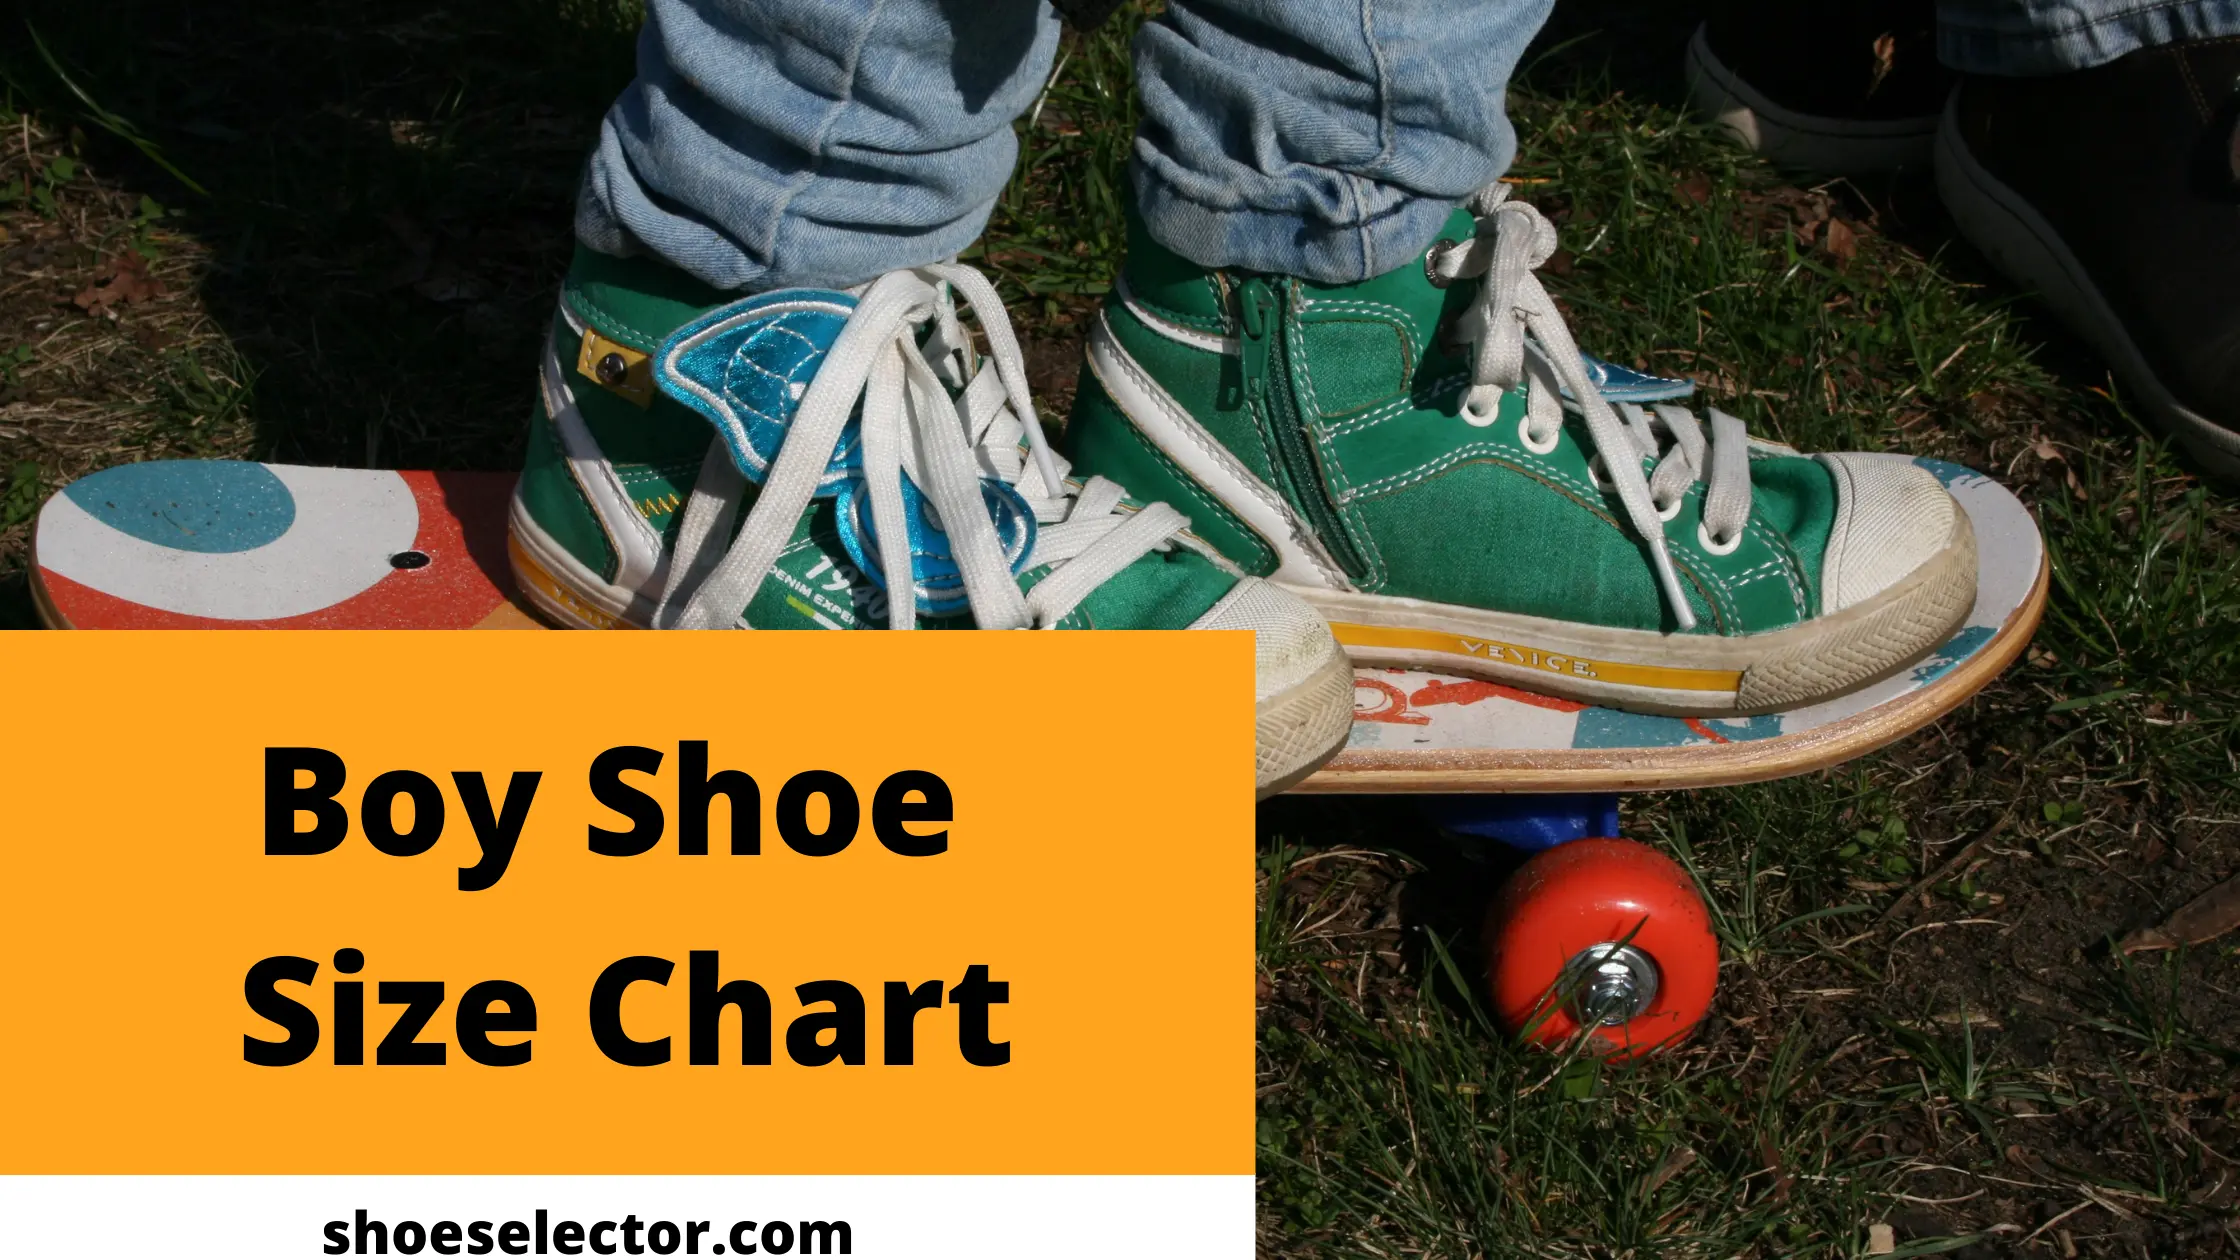 Boys Shoe Size Chart - Brief Guide